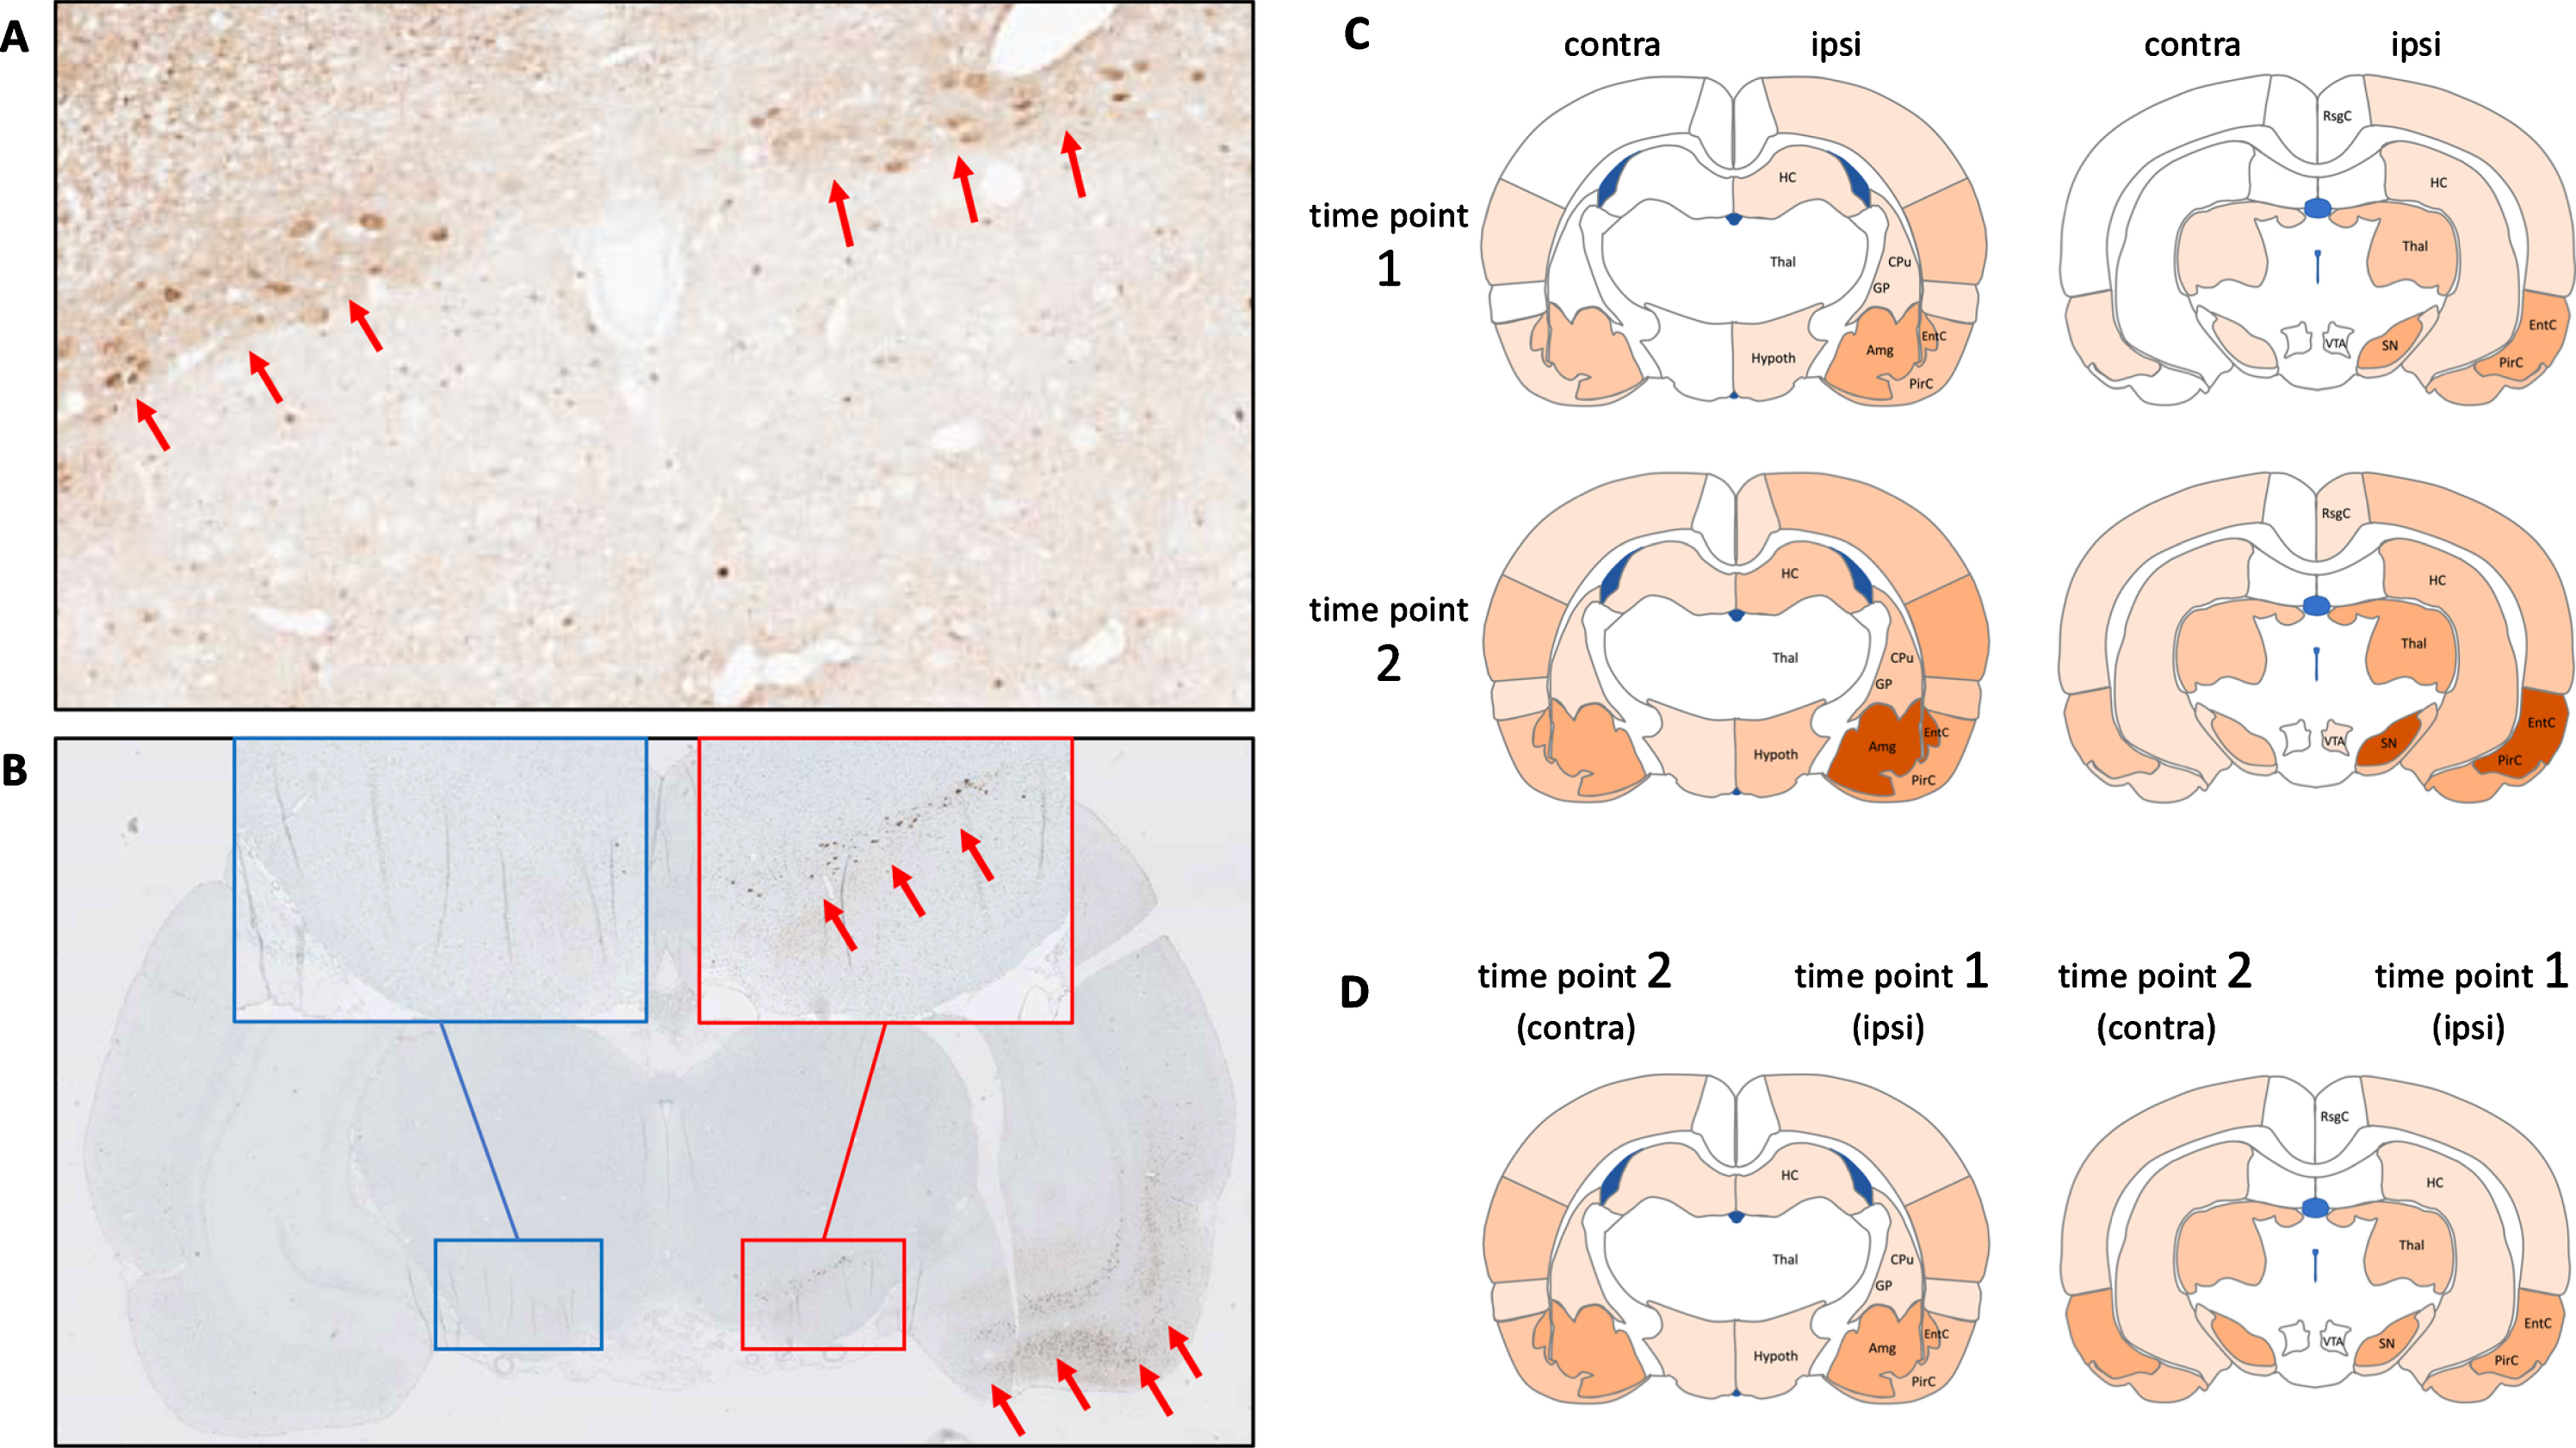 A) The DMV nuclei in rats show symmetric deposits of pathological, hyperphosphorylated α-synuclein inclusions following injection of α-synuclein seeds in the duodenum. B) Following unilateral injection of α-synuclein fibrils into the amygdala, α-synuclein inclusions are seen in ipsilateral limbic and cortical structures, with early involvement of the ipsilateral substantia nigra (red insert). No contralateral pathology is seen at this early timepoint. These wild-type rats were both sacrificed three months post-injection. C) Schematic representation of published data from injection of α-synuclein seeds unilaterally into a single CNS location [56, 57, 59]. Markedly asymmetric α-synuclein pathology is evident at the early time point 1. At the later time point 2, progressive accumulation of α-synuclein is seen in nearly all affected regions, but the asymmetry persists. D) The distribution of α-synuclein pathology in the ipsilateral hemisphere at time point 1 is very similar to the α-synuclein distribution in the contralateral hemisphere at time point 2. This suggests that the α-synuclein pathology in the contralateral hemisphere is, in part, promoted by commissural homolog-to-homolog connections from the ipsilateral hemisphere.